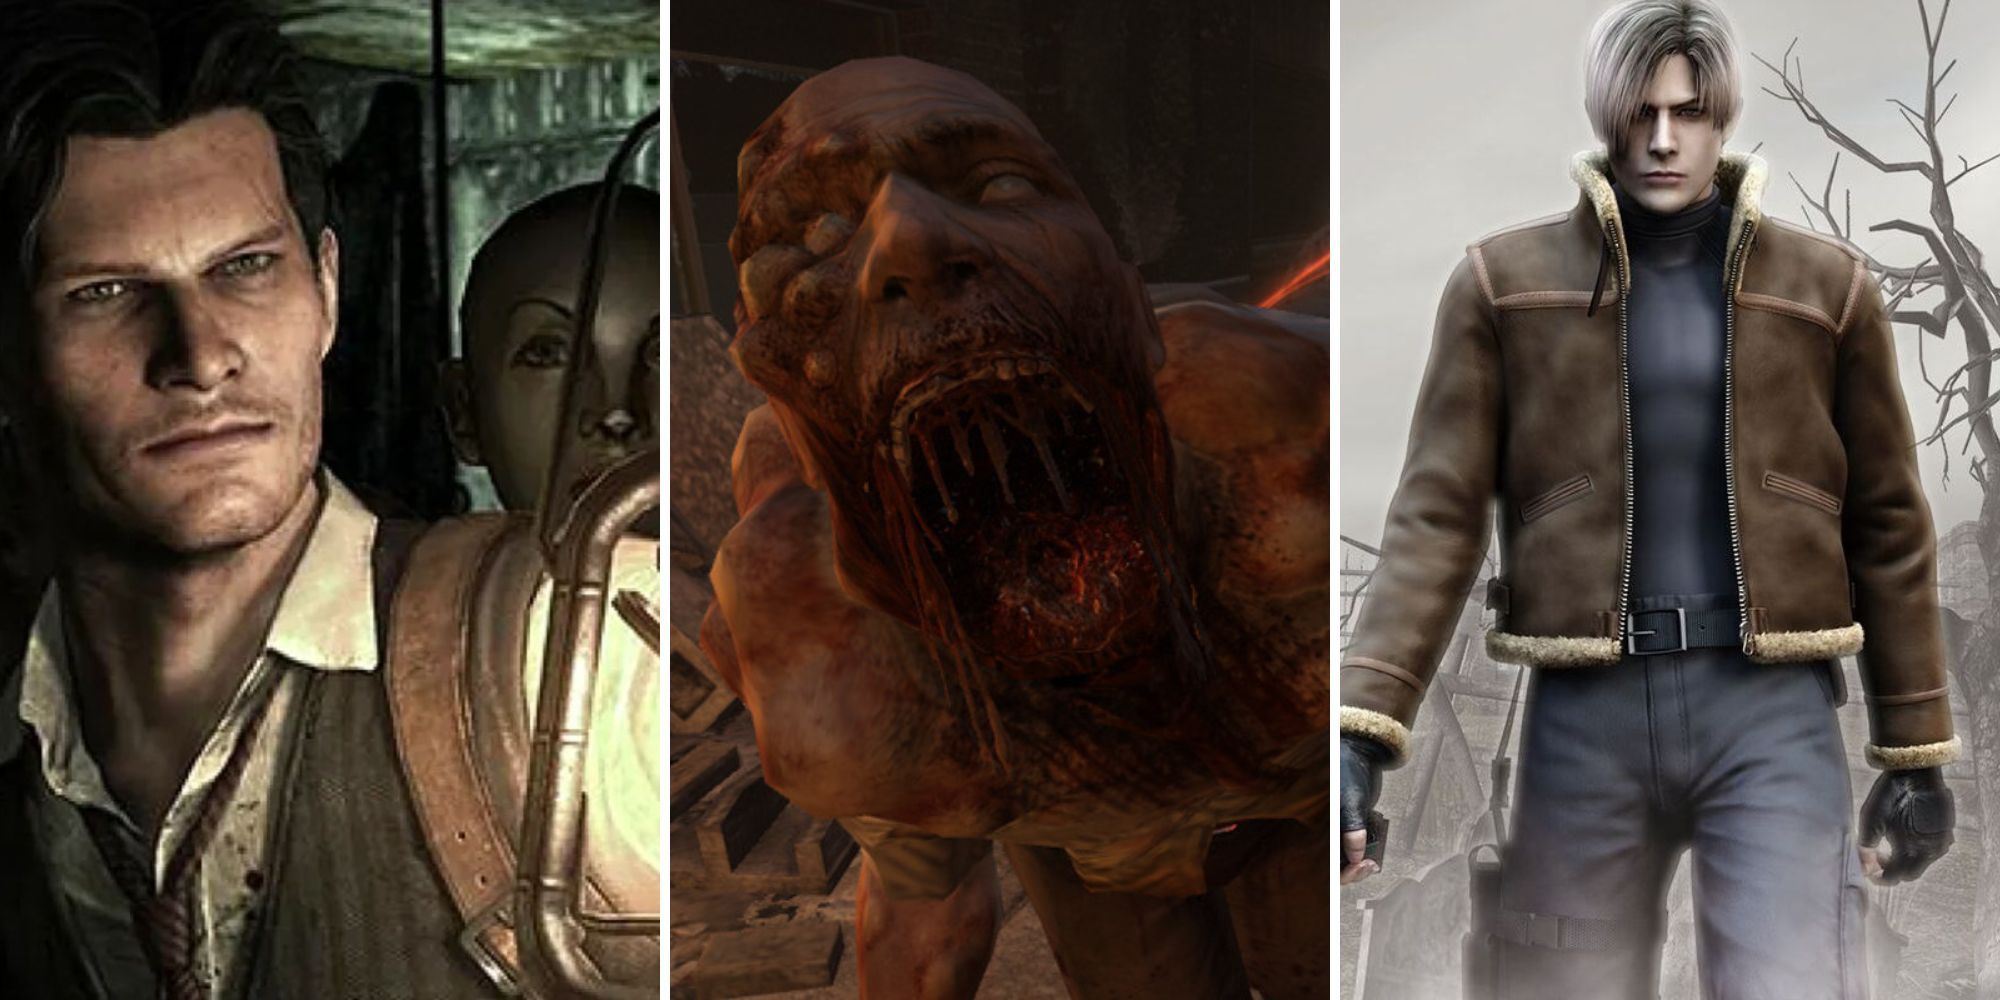 A grid of the horror games The Evil Within / F.E.A.R 2: Project Origins / Resident Evil 4 HD